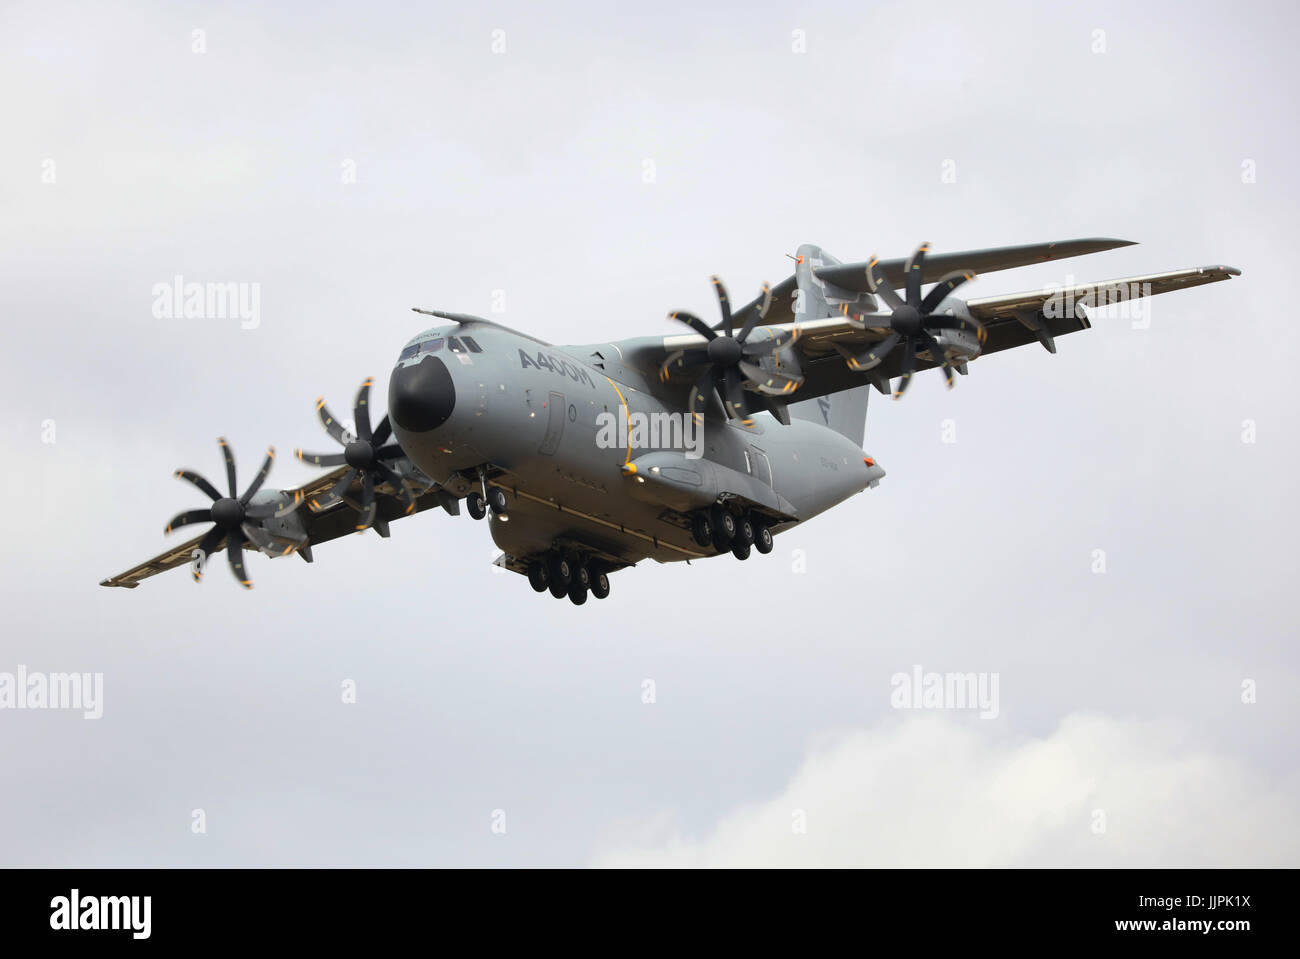 Airbus A400m transports air tattoo 2017 Banque D'Images